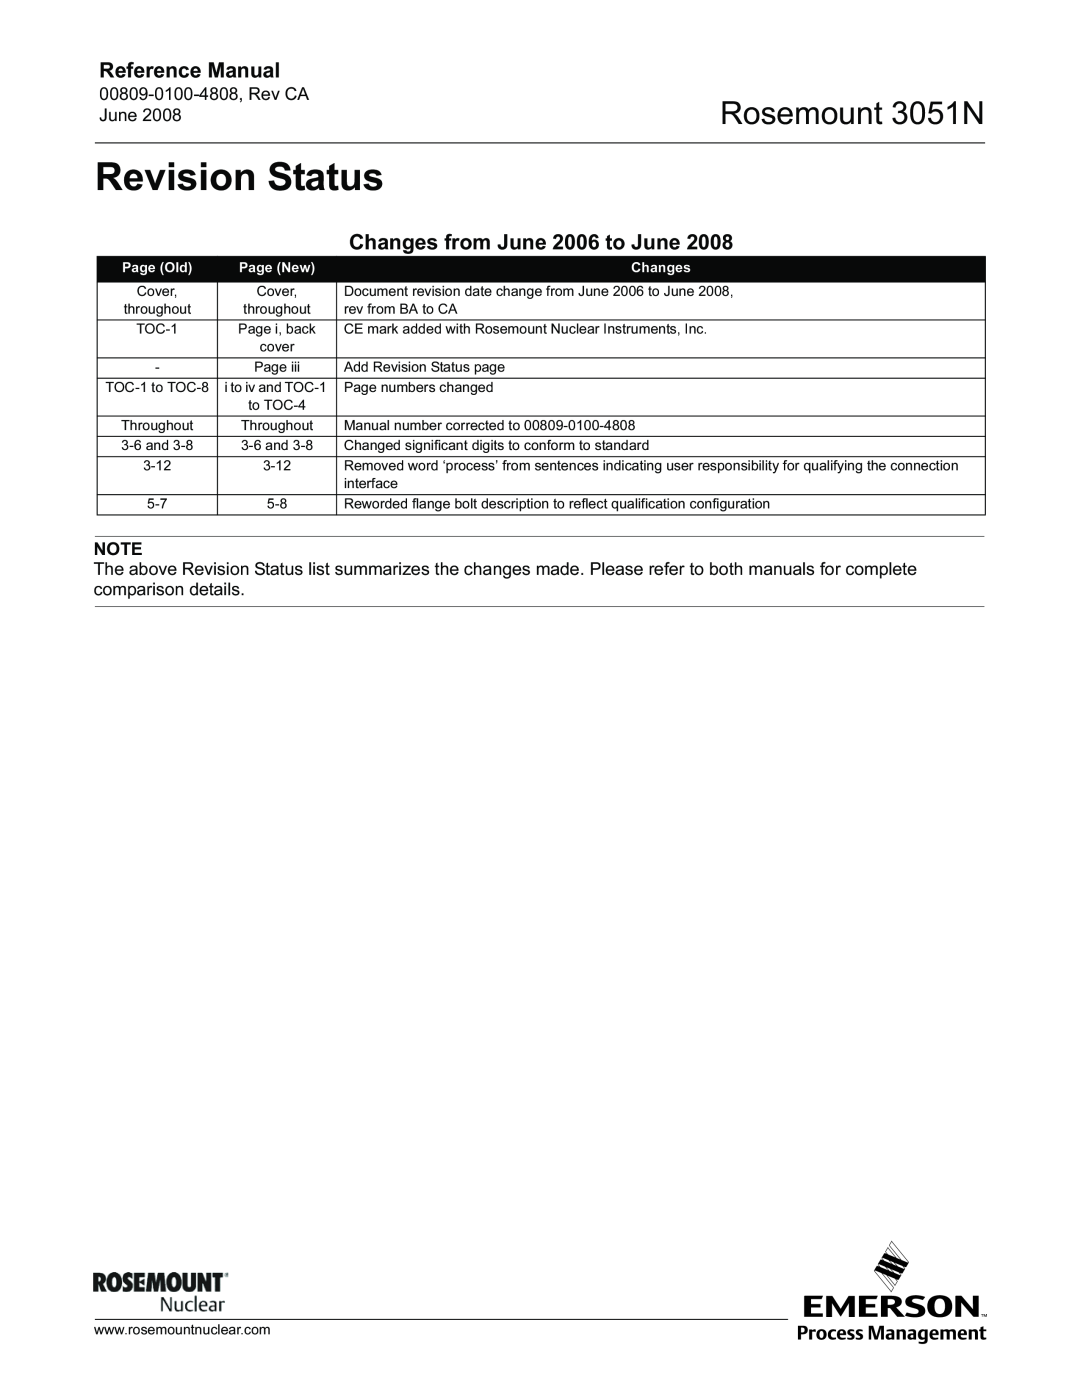 Emerson manual Revision Status, Changes from June 2006 to June, Rosemount 3051N, Reference Manual 